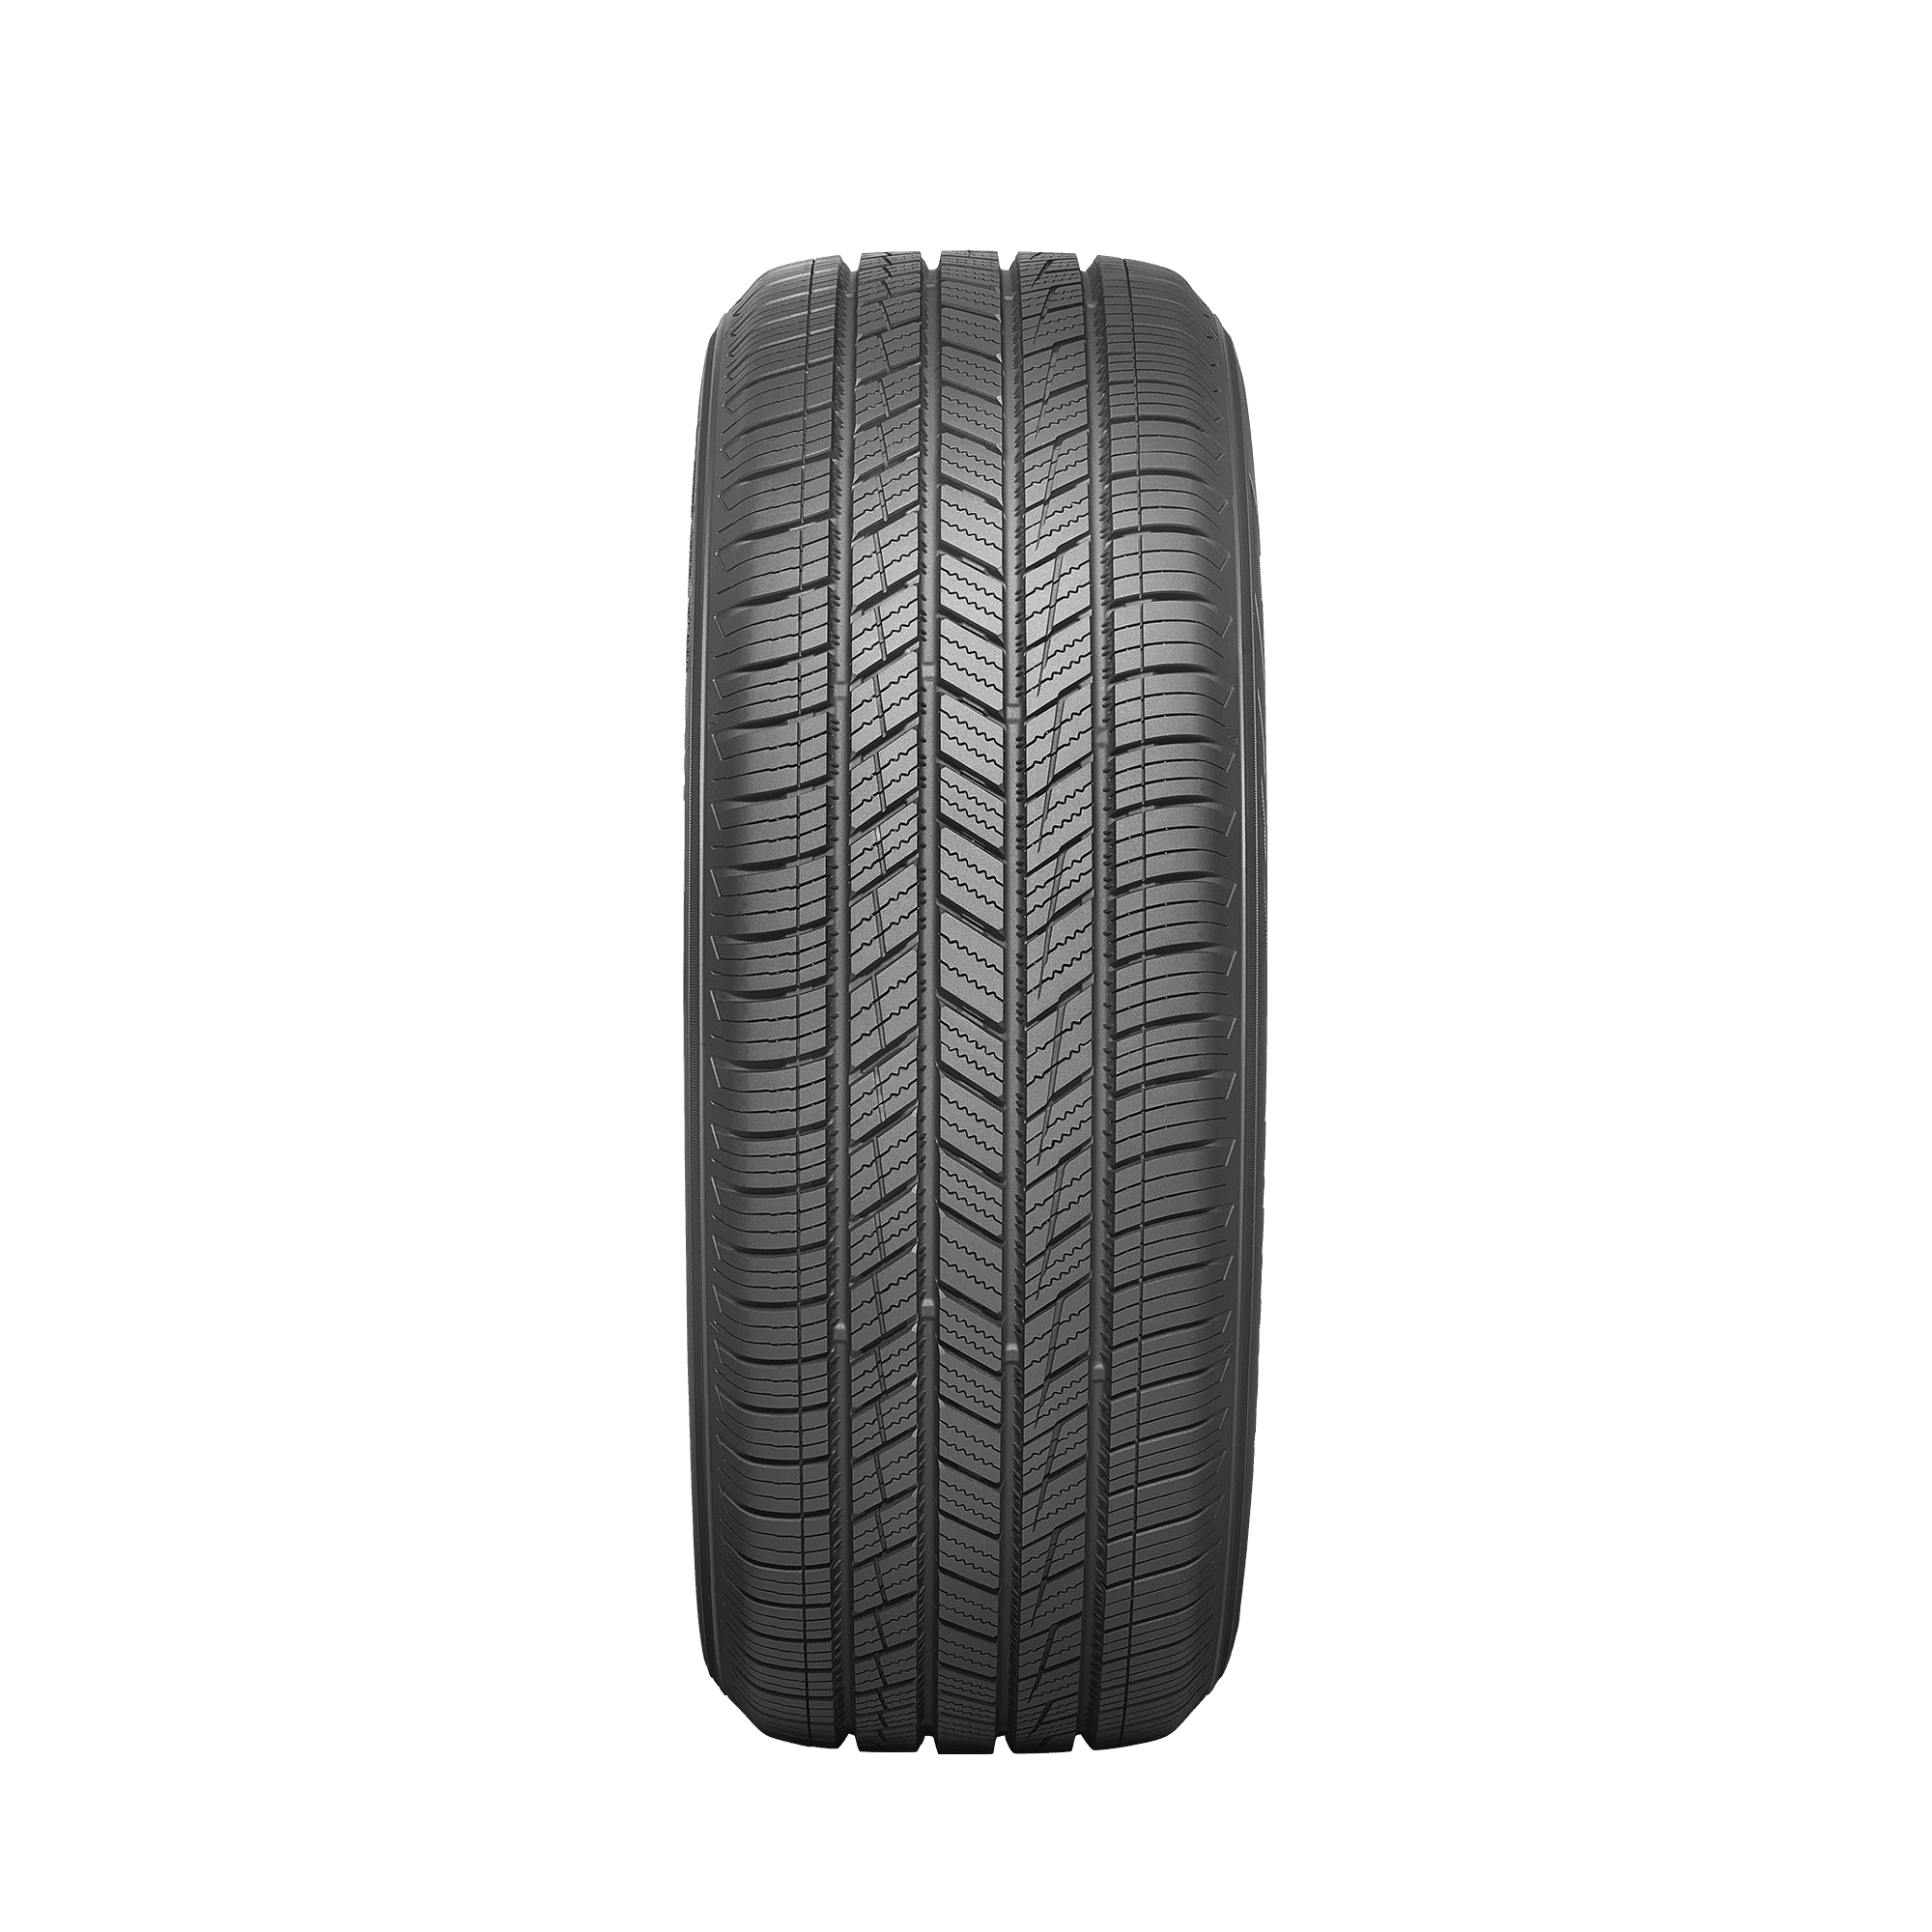 Buy Kumho Solus TA51a Tires Online | SimpleTire